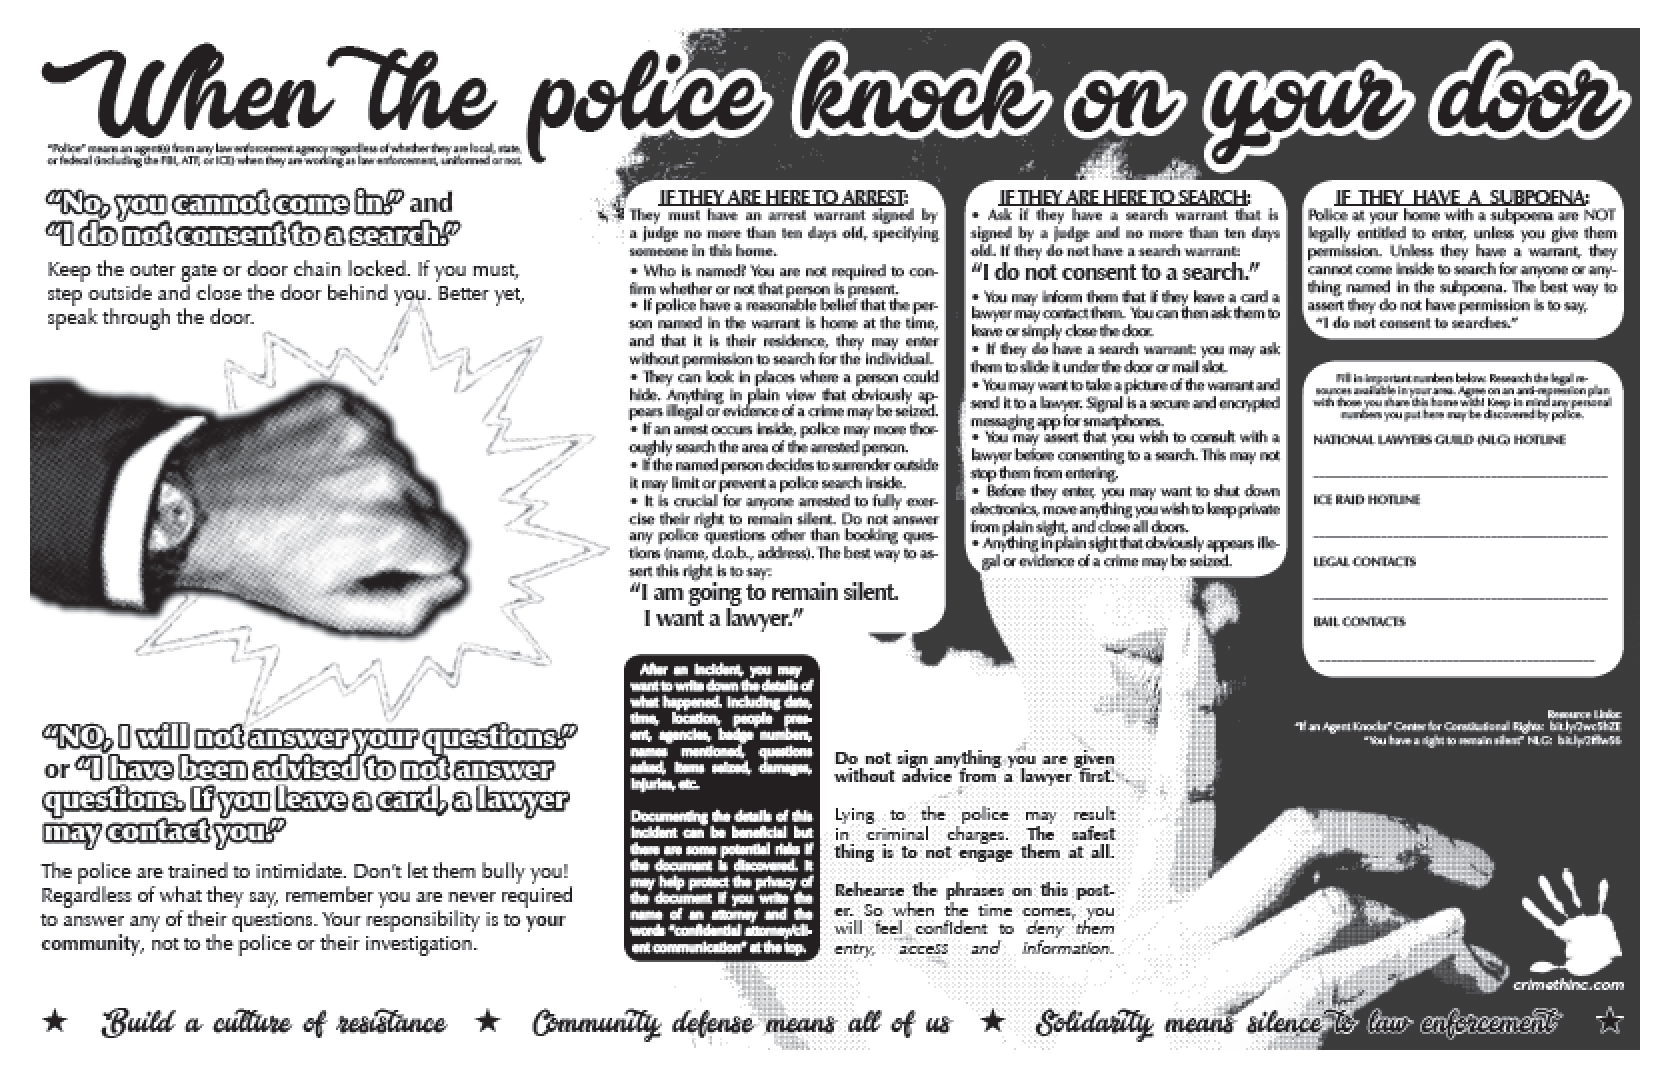 Photo of ‘When the Police Knock on Your Door’ front side